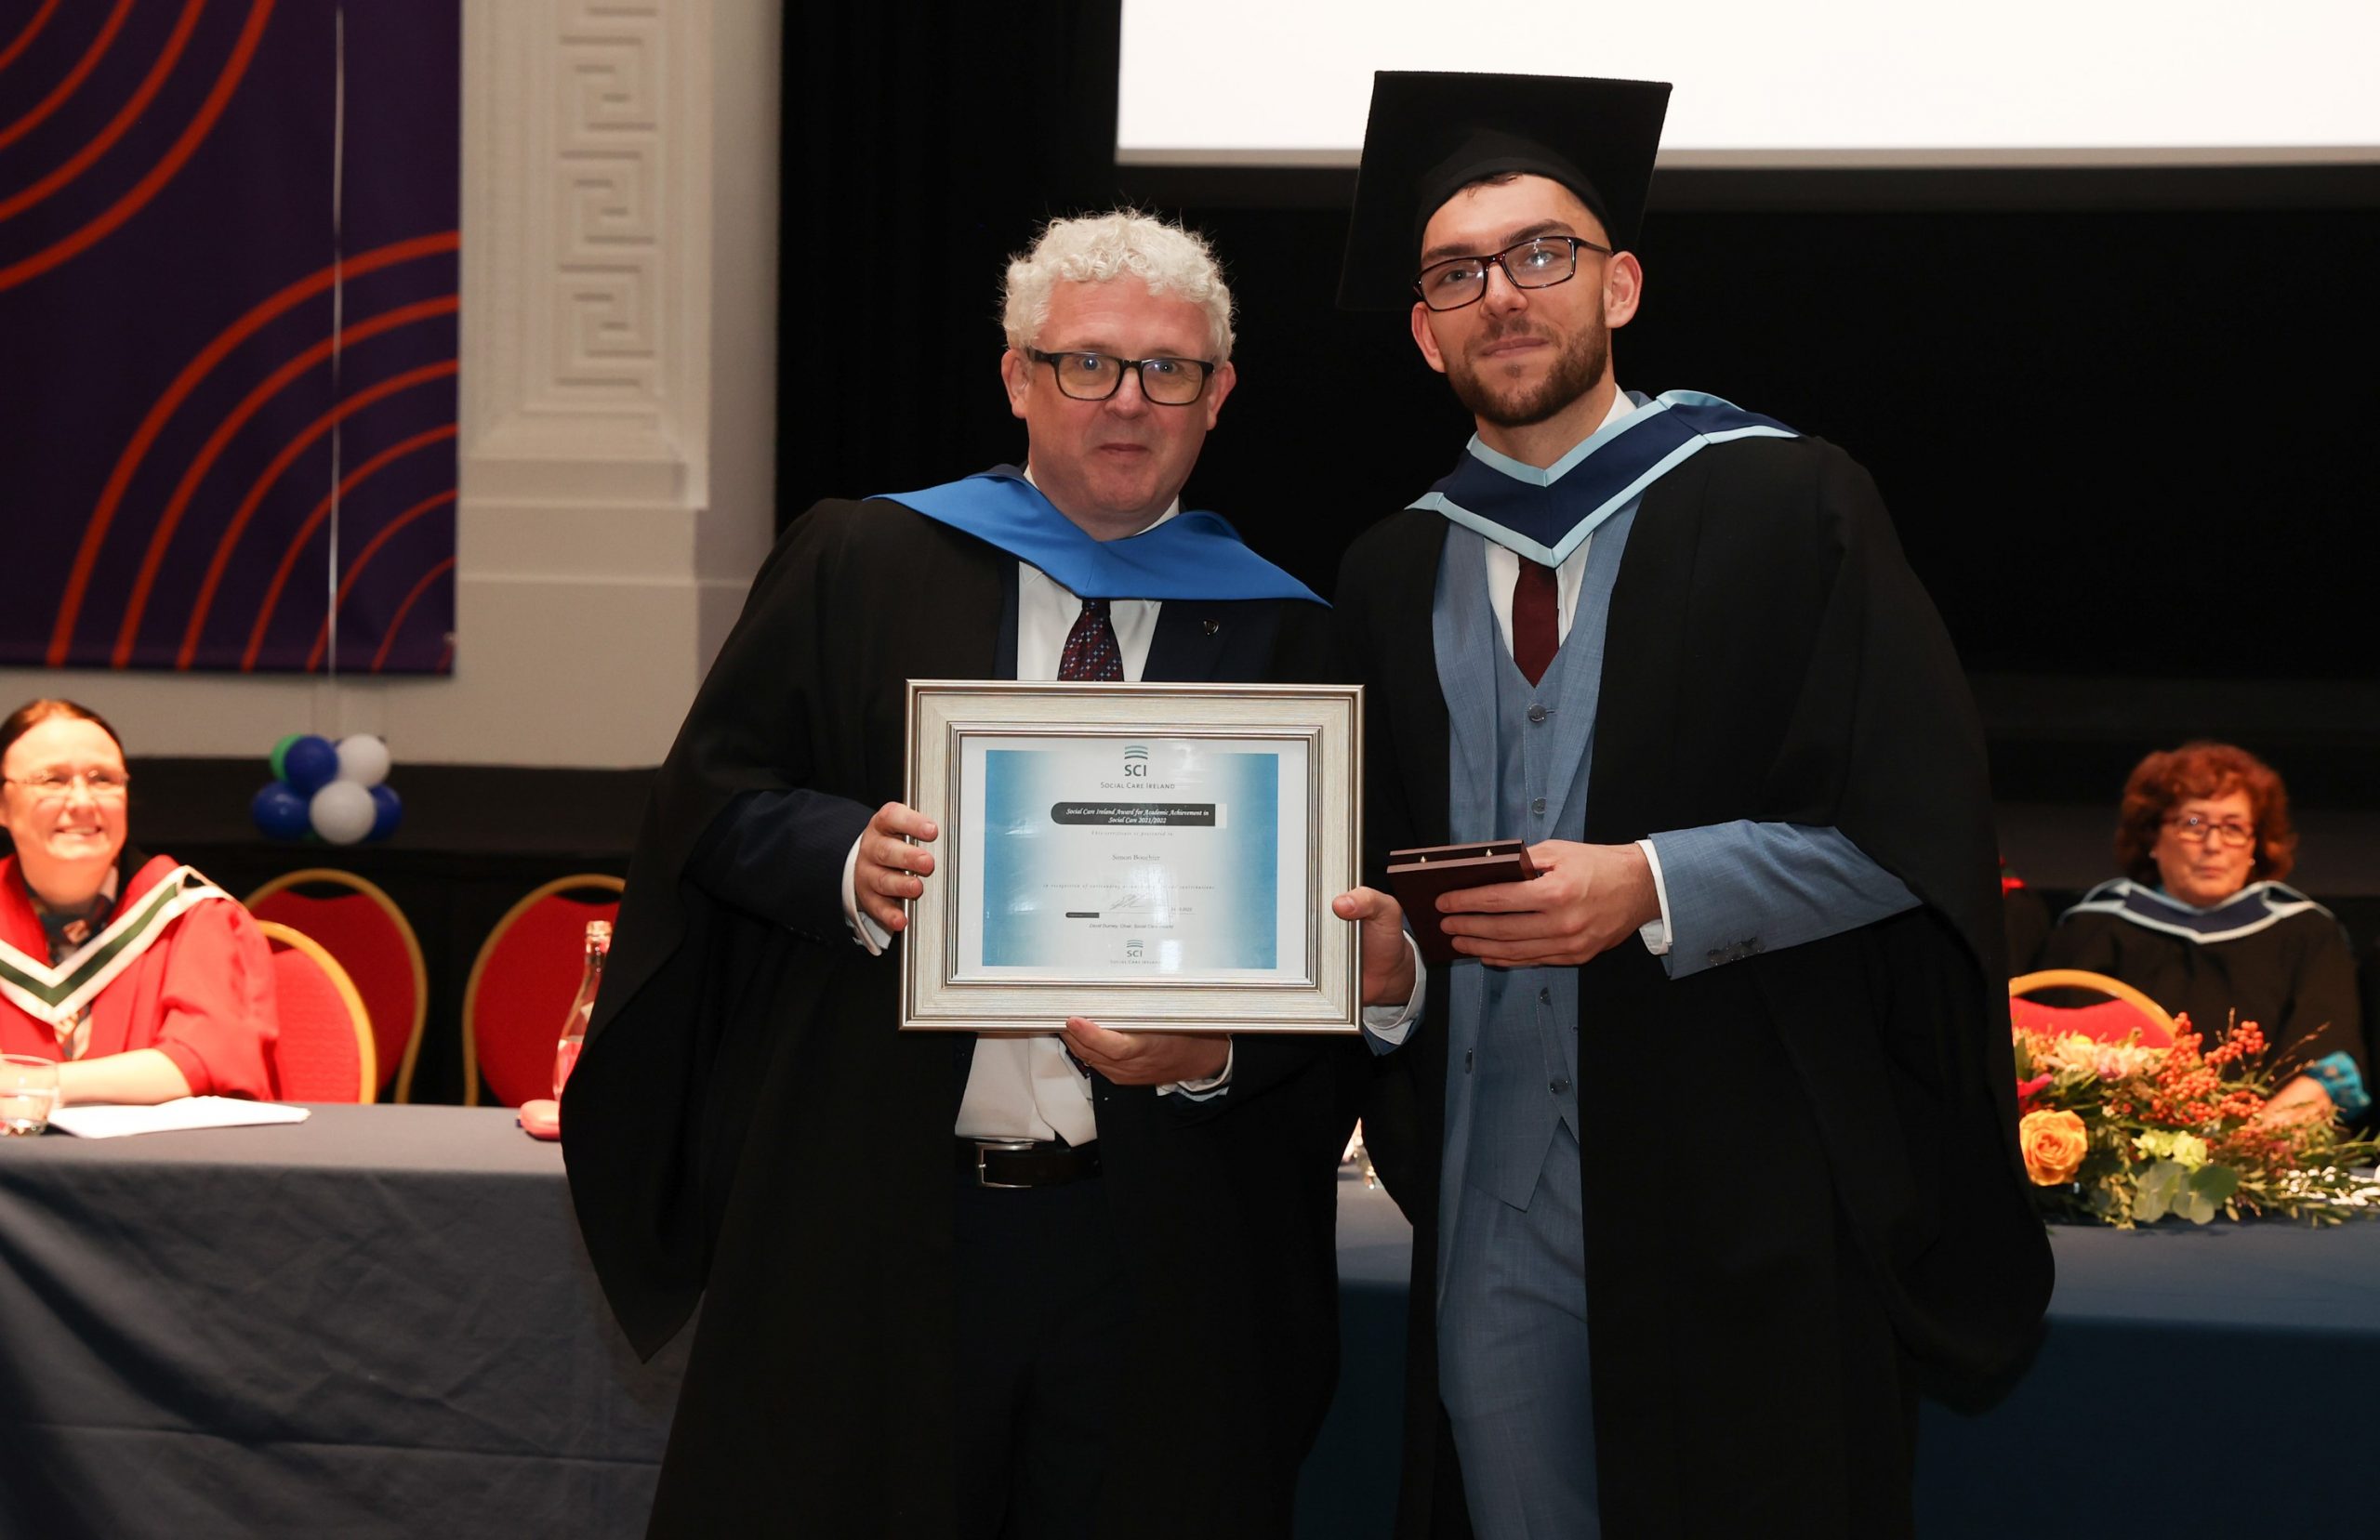 Simon Bouchier receiveds the SCI Student of the Year Award 2022